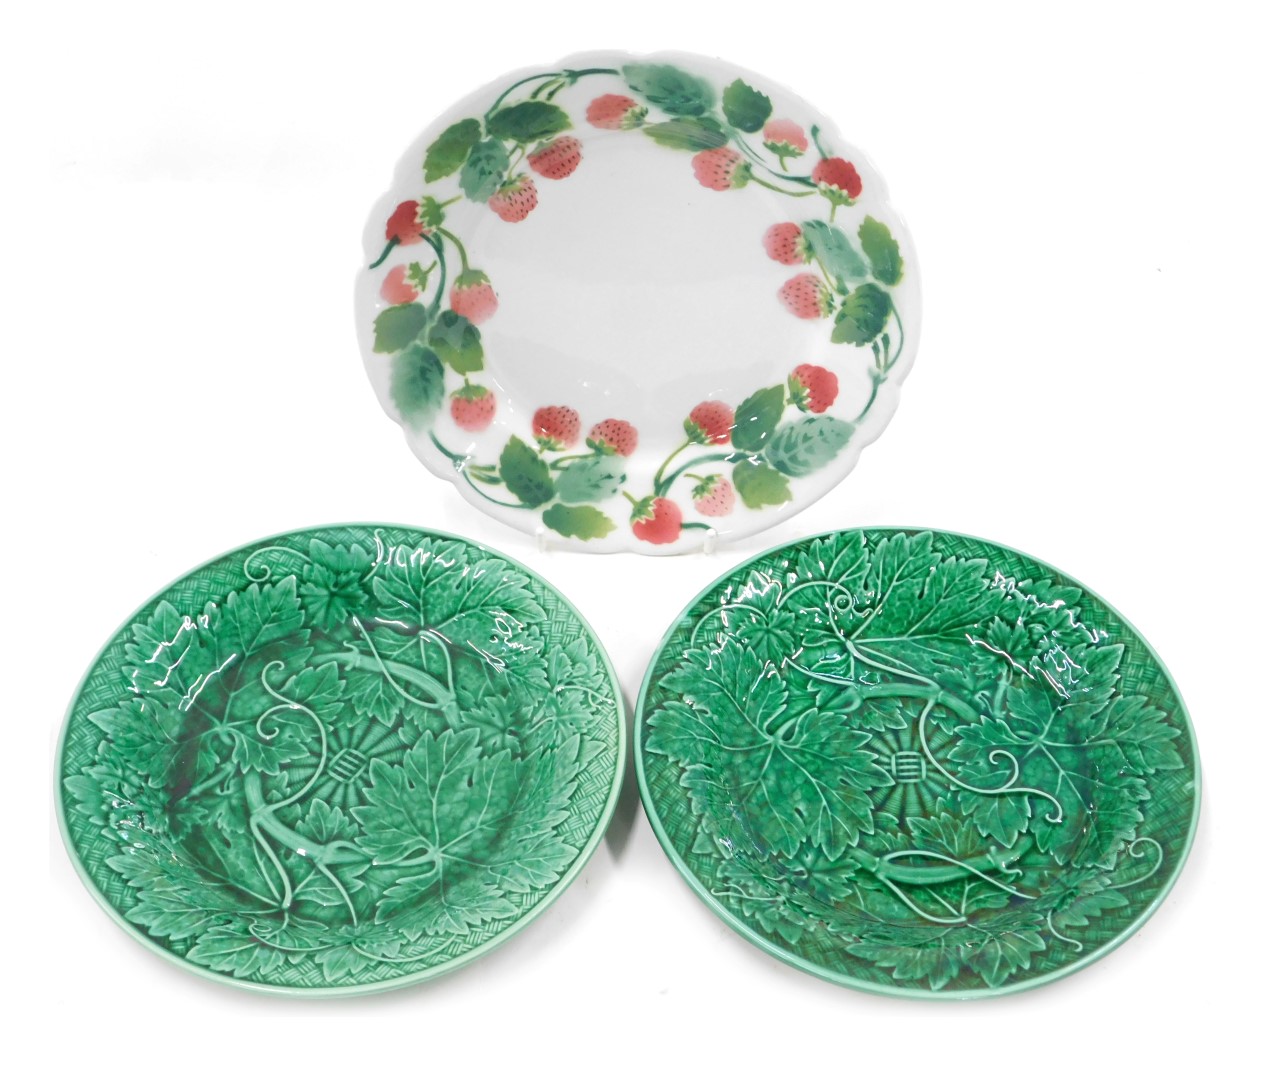 A French Luneville plate decorated with a band of strawberries, and two Wedgwood green leaf moulded